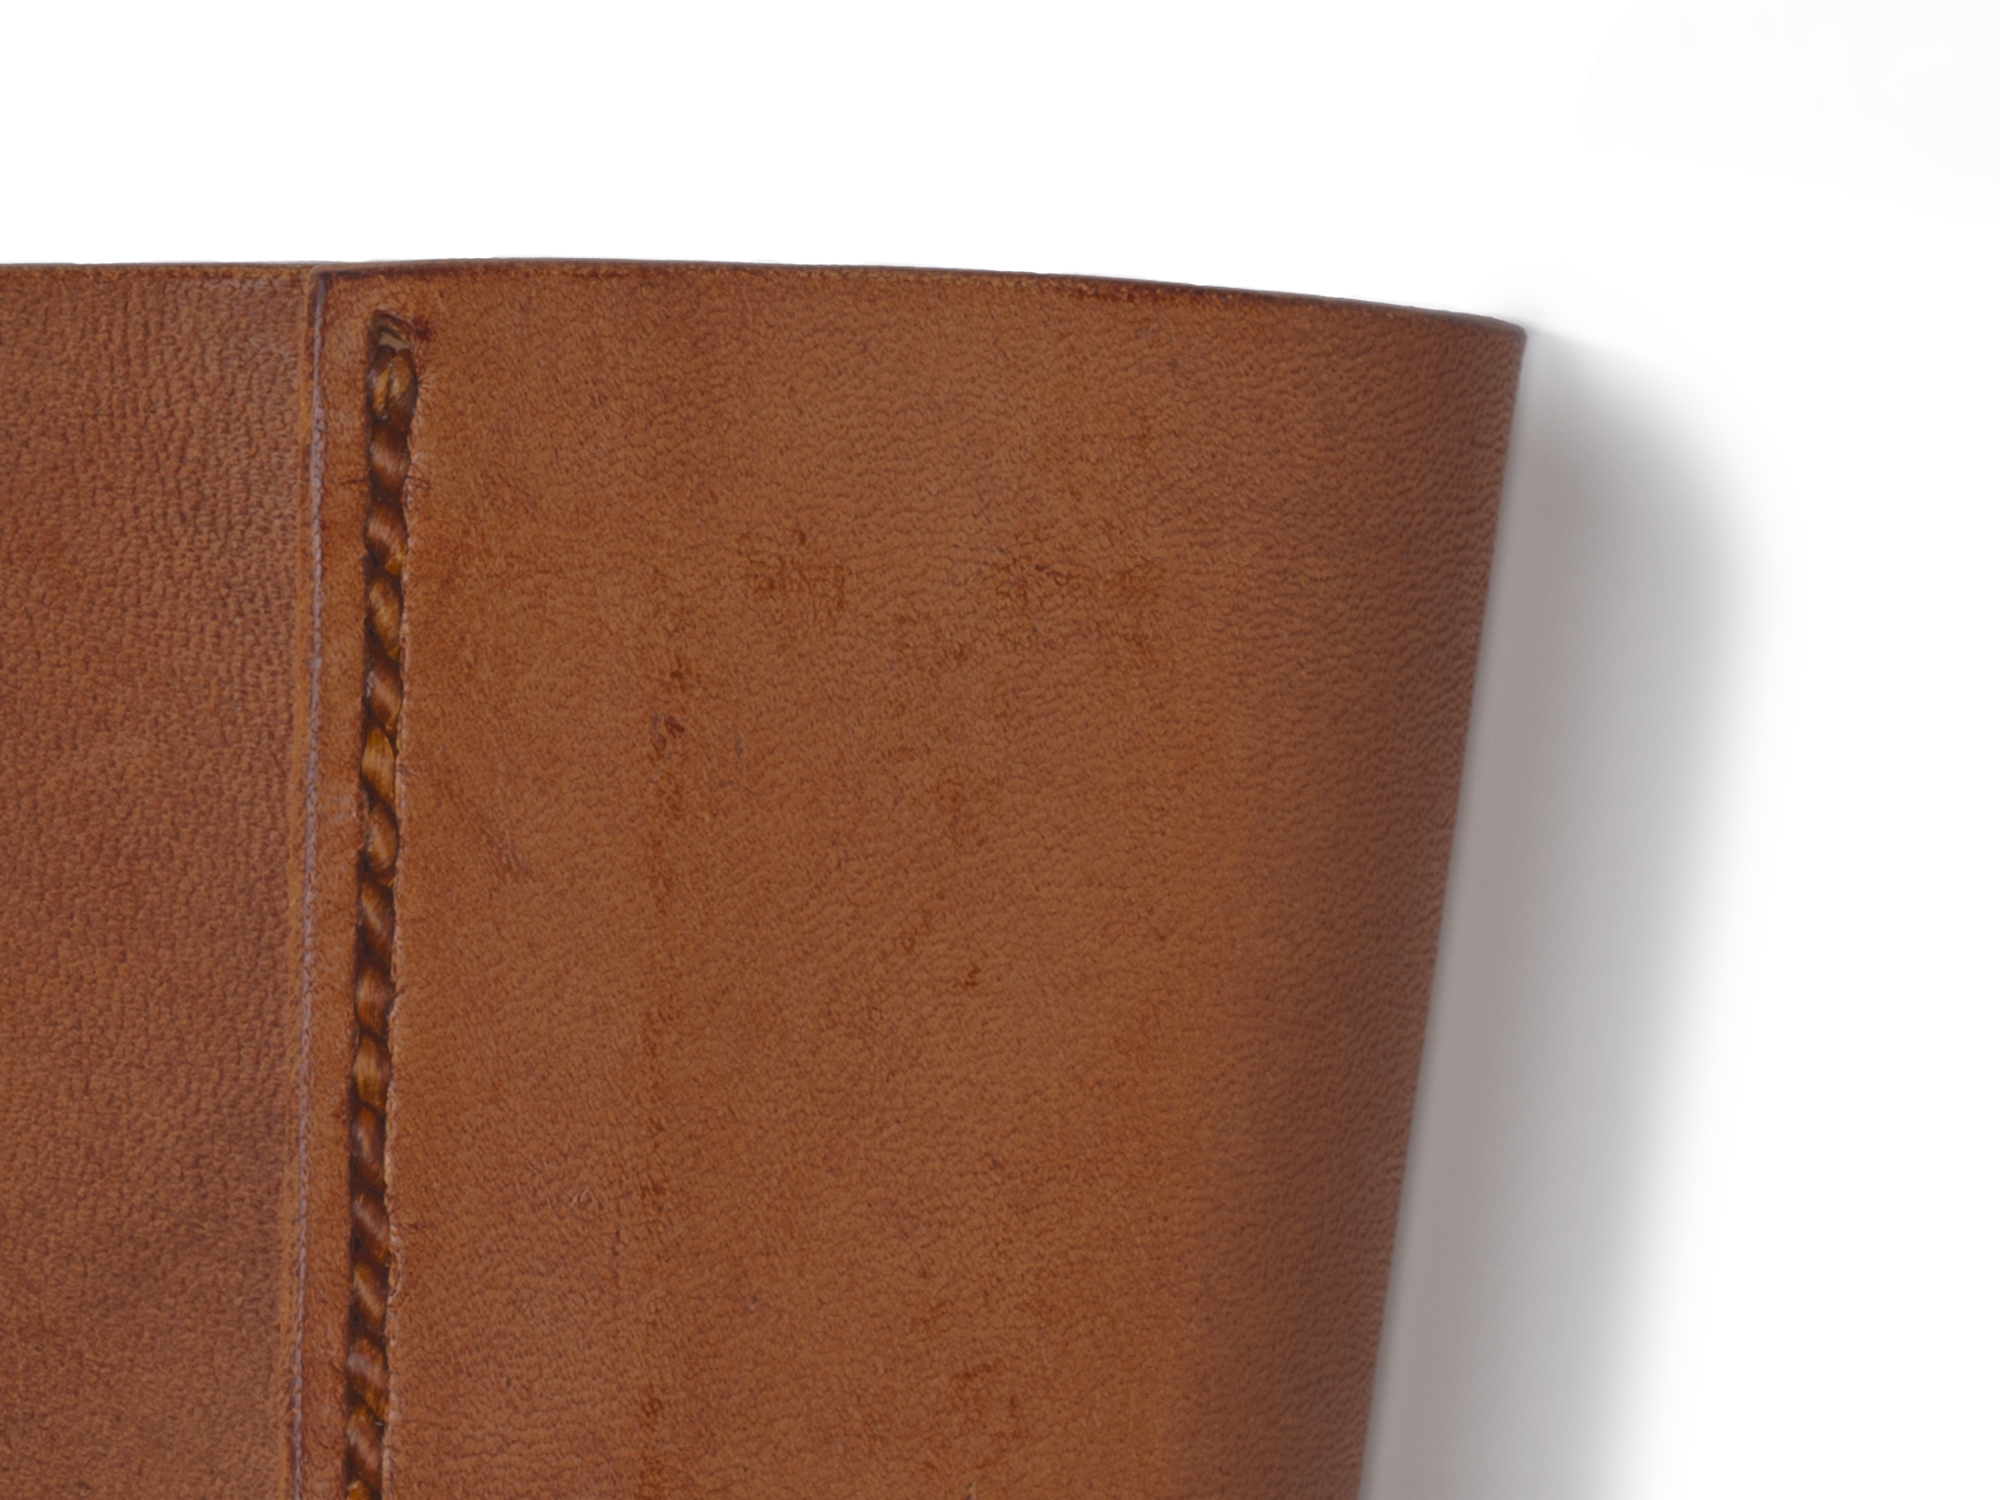 A technique established in 1919.<br />
Cup sleeves made from cowhide tanned using multiple processes.